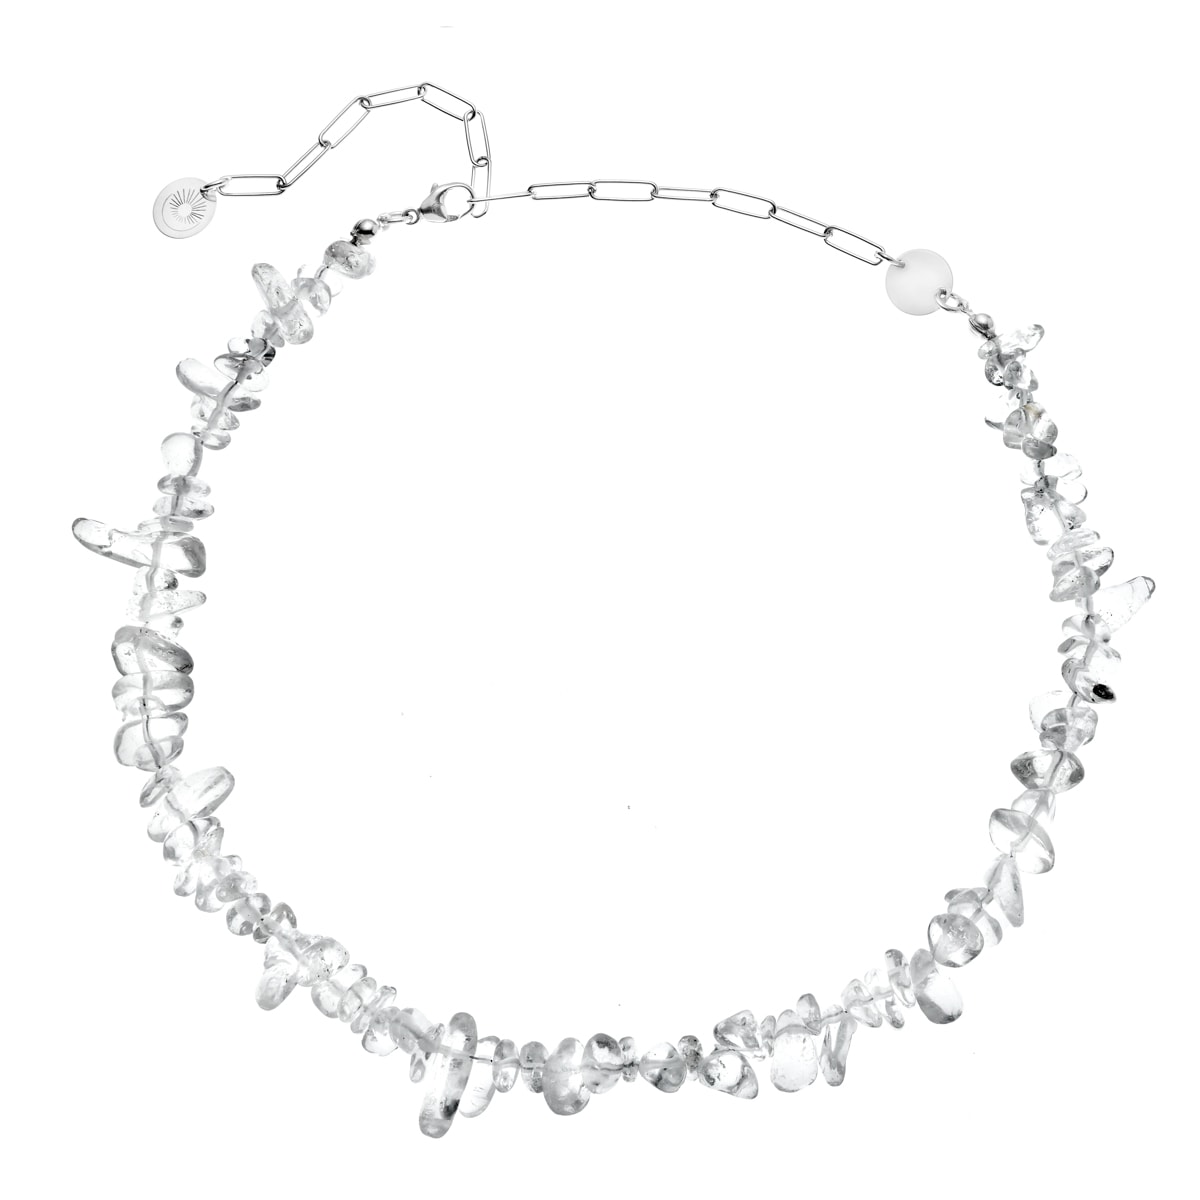 Crystal quartz necklace with silver chain